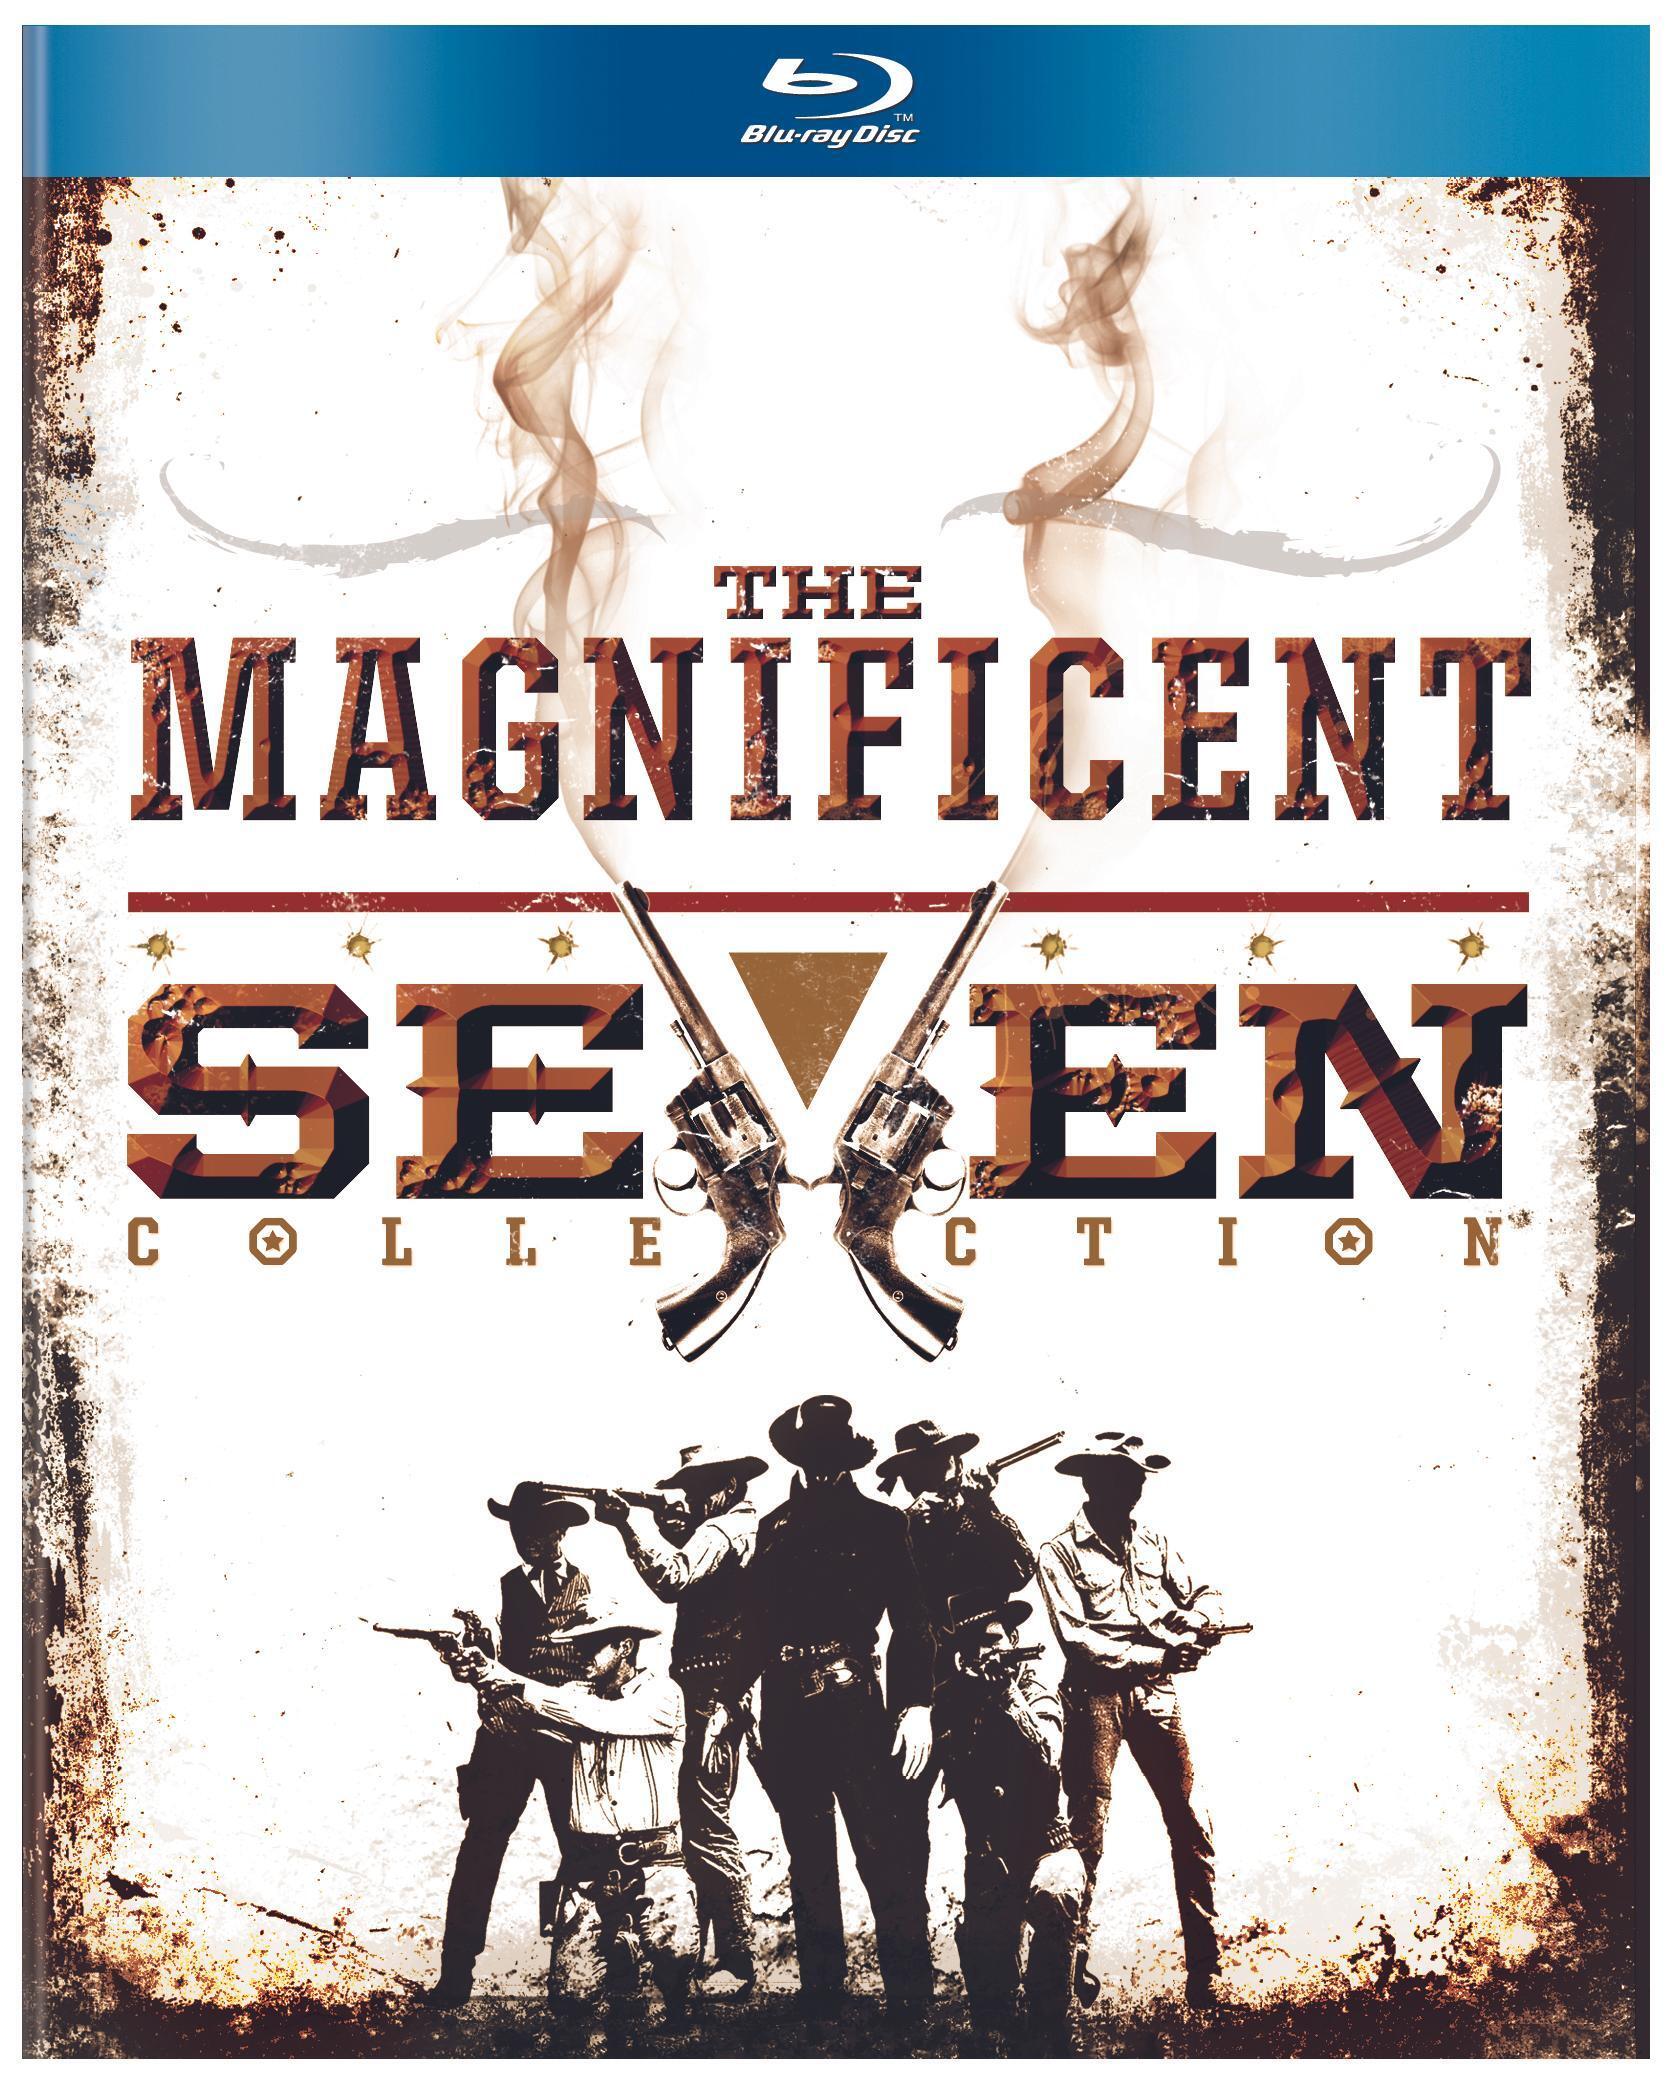 The Magnificent Seven Collection (Box Set) - Blu-ray [ 1972 ]  - Western Movies On Blu-ray - Movies On GRUV